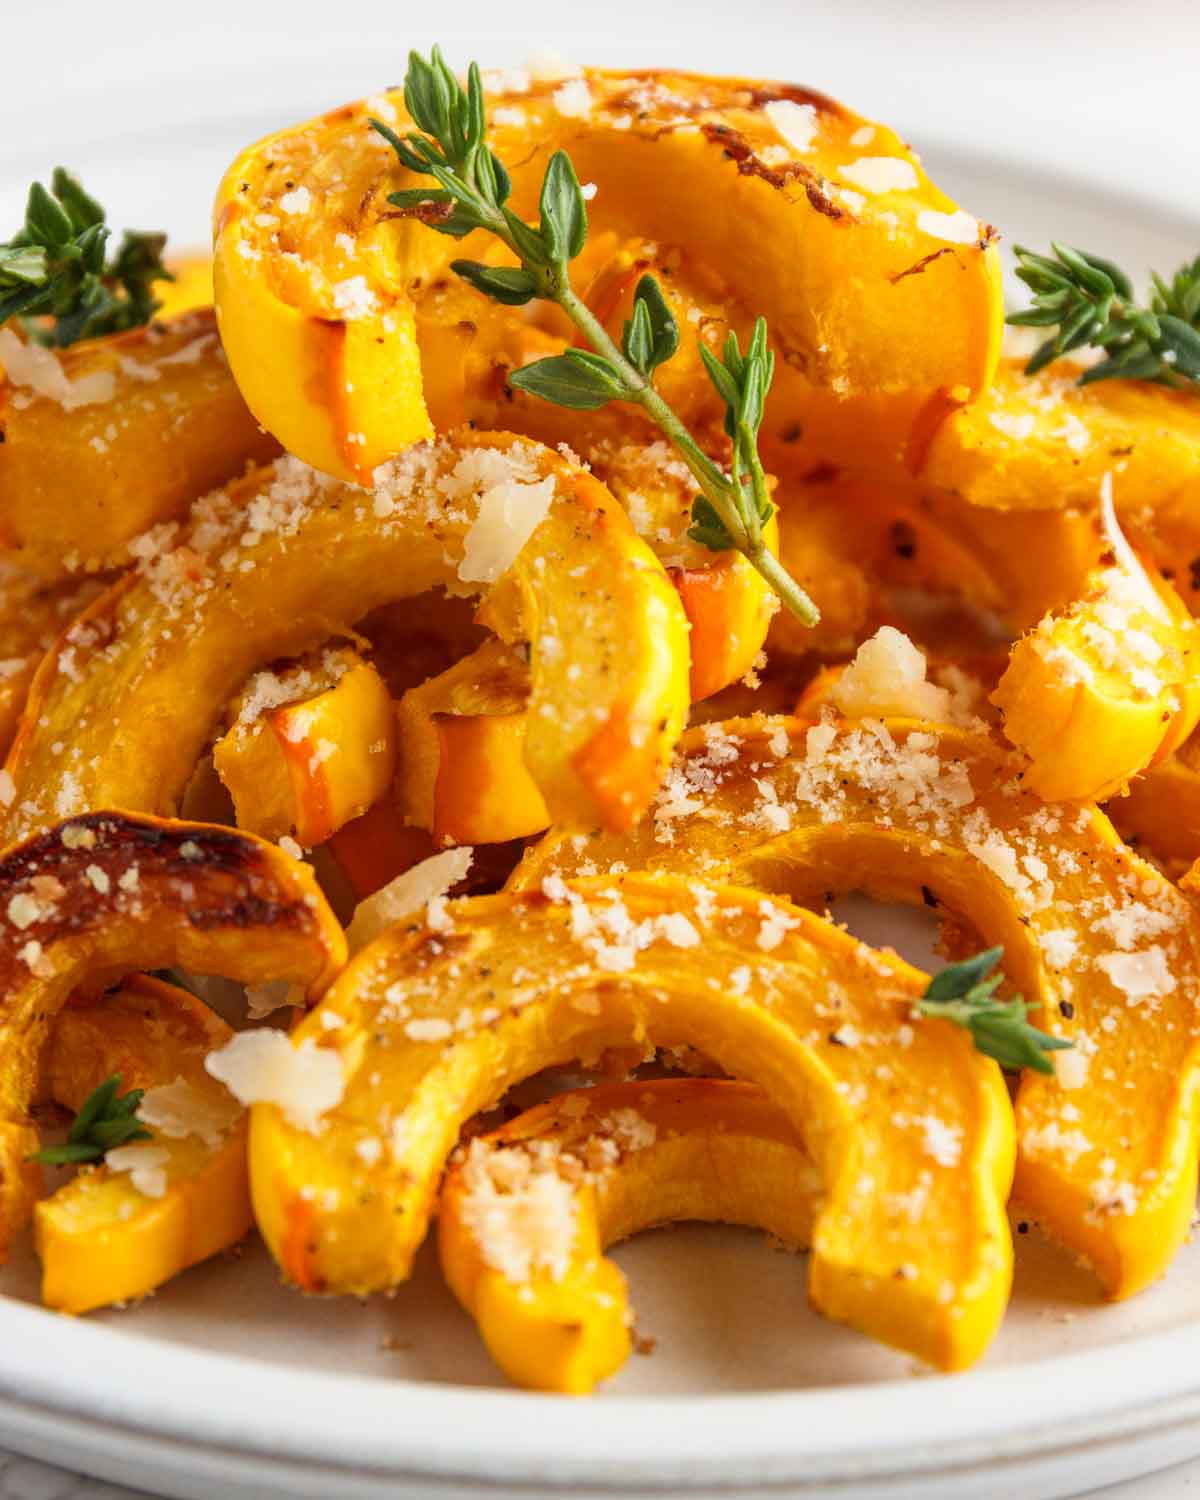 A plate of roasted parmesan delicata squash slices with thyme leaves.